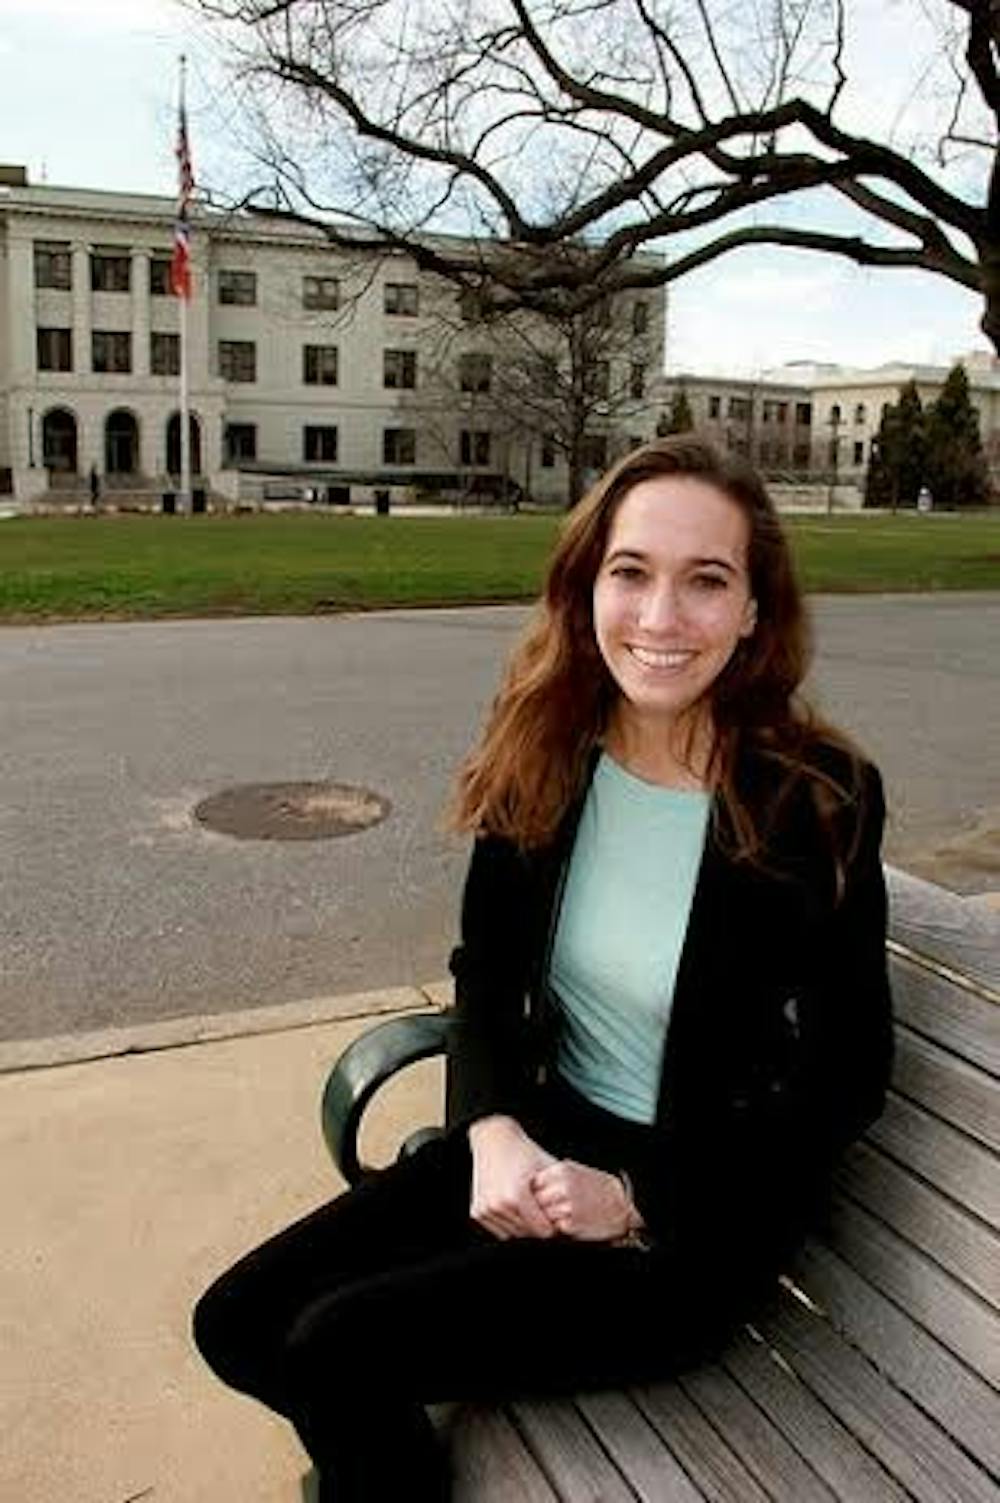 Two AU students win Truman Scholarship, $30,000 each